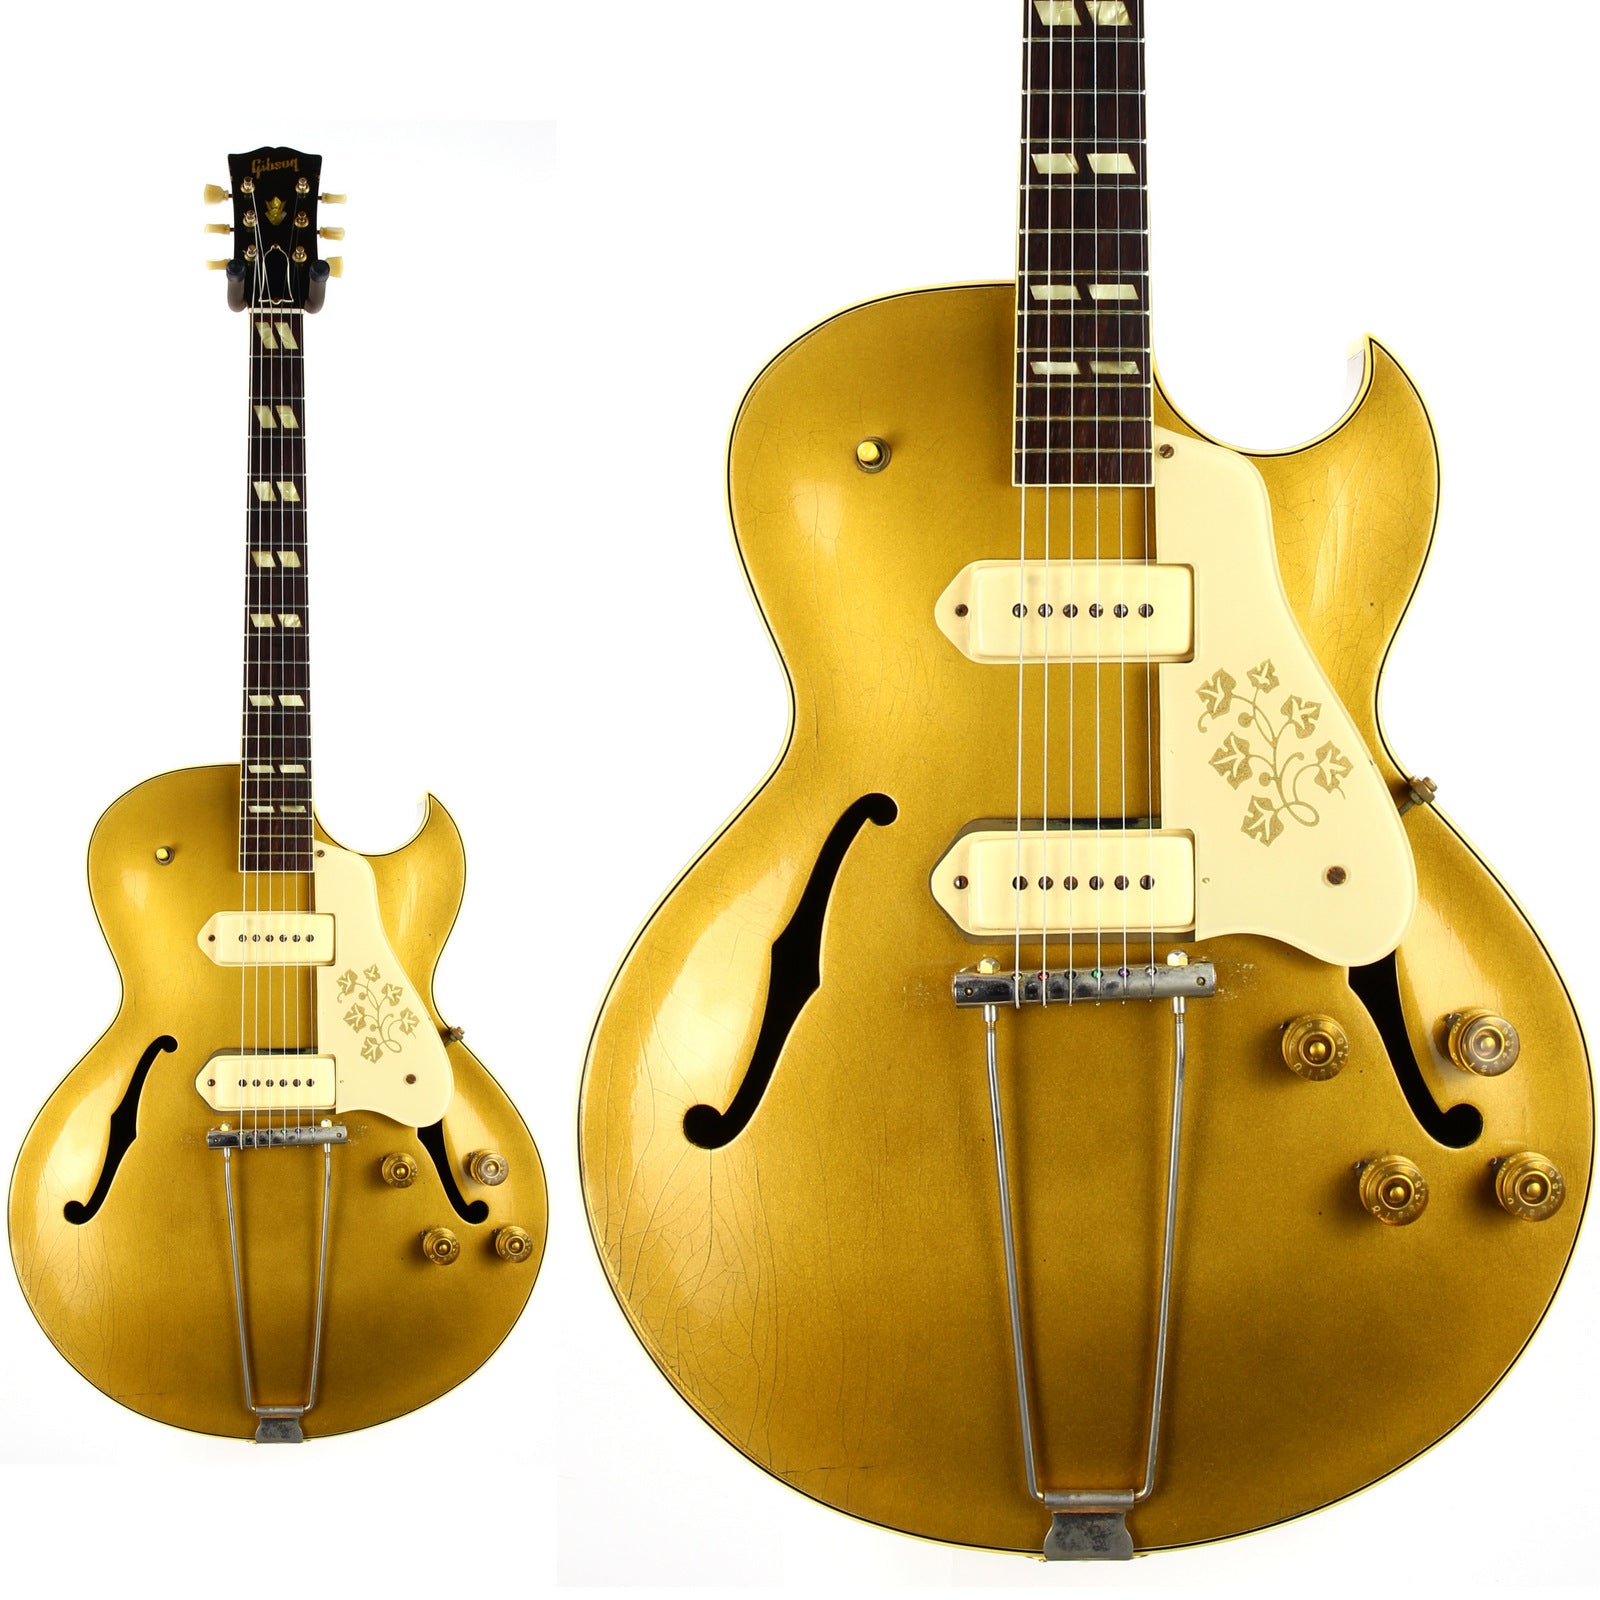 1952 Gibson ES-295 ALL GOLD | 2 P-90 Pickups, Vintage Archtop Jazz Electric Guitar | Scotty Moore, Early Elvis Presley, ES-175D 1959